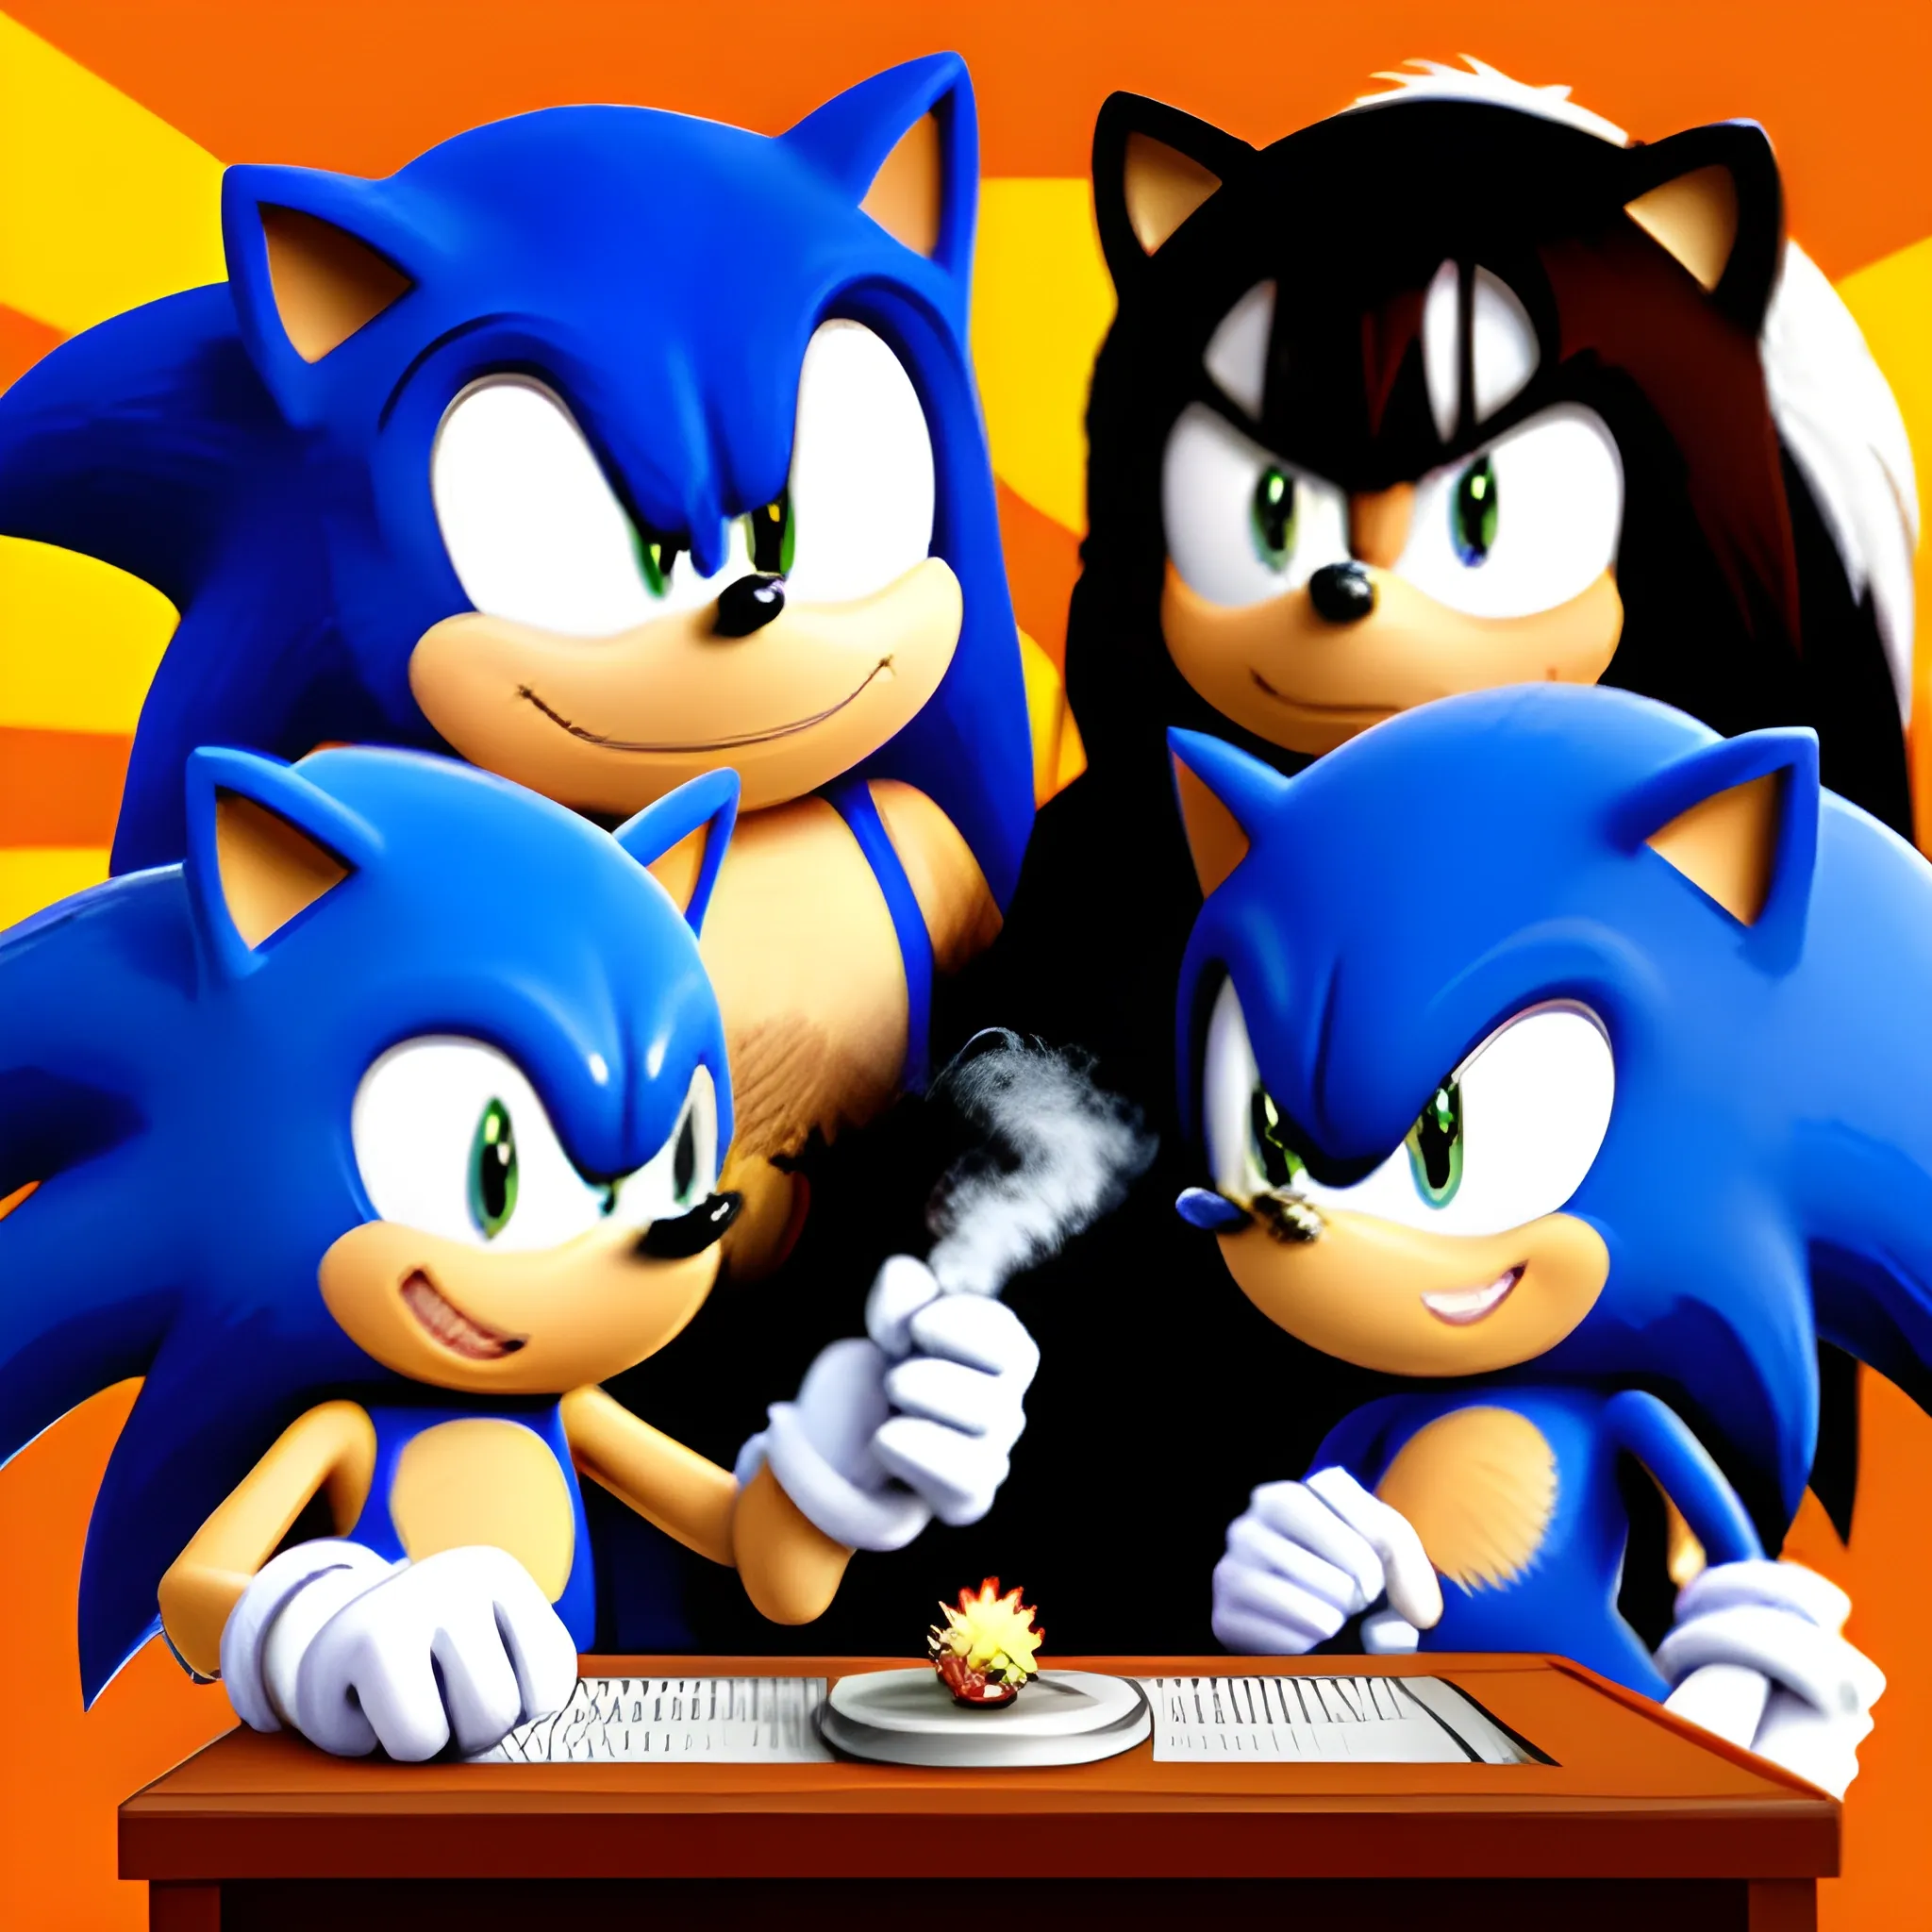 The Beatles & Sonic the hedgehog, smoking a joint